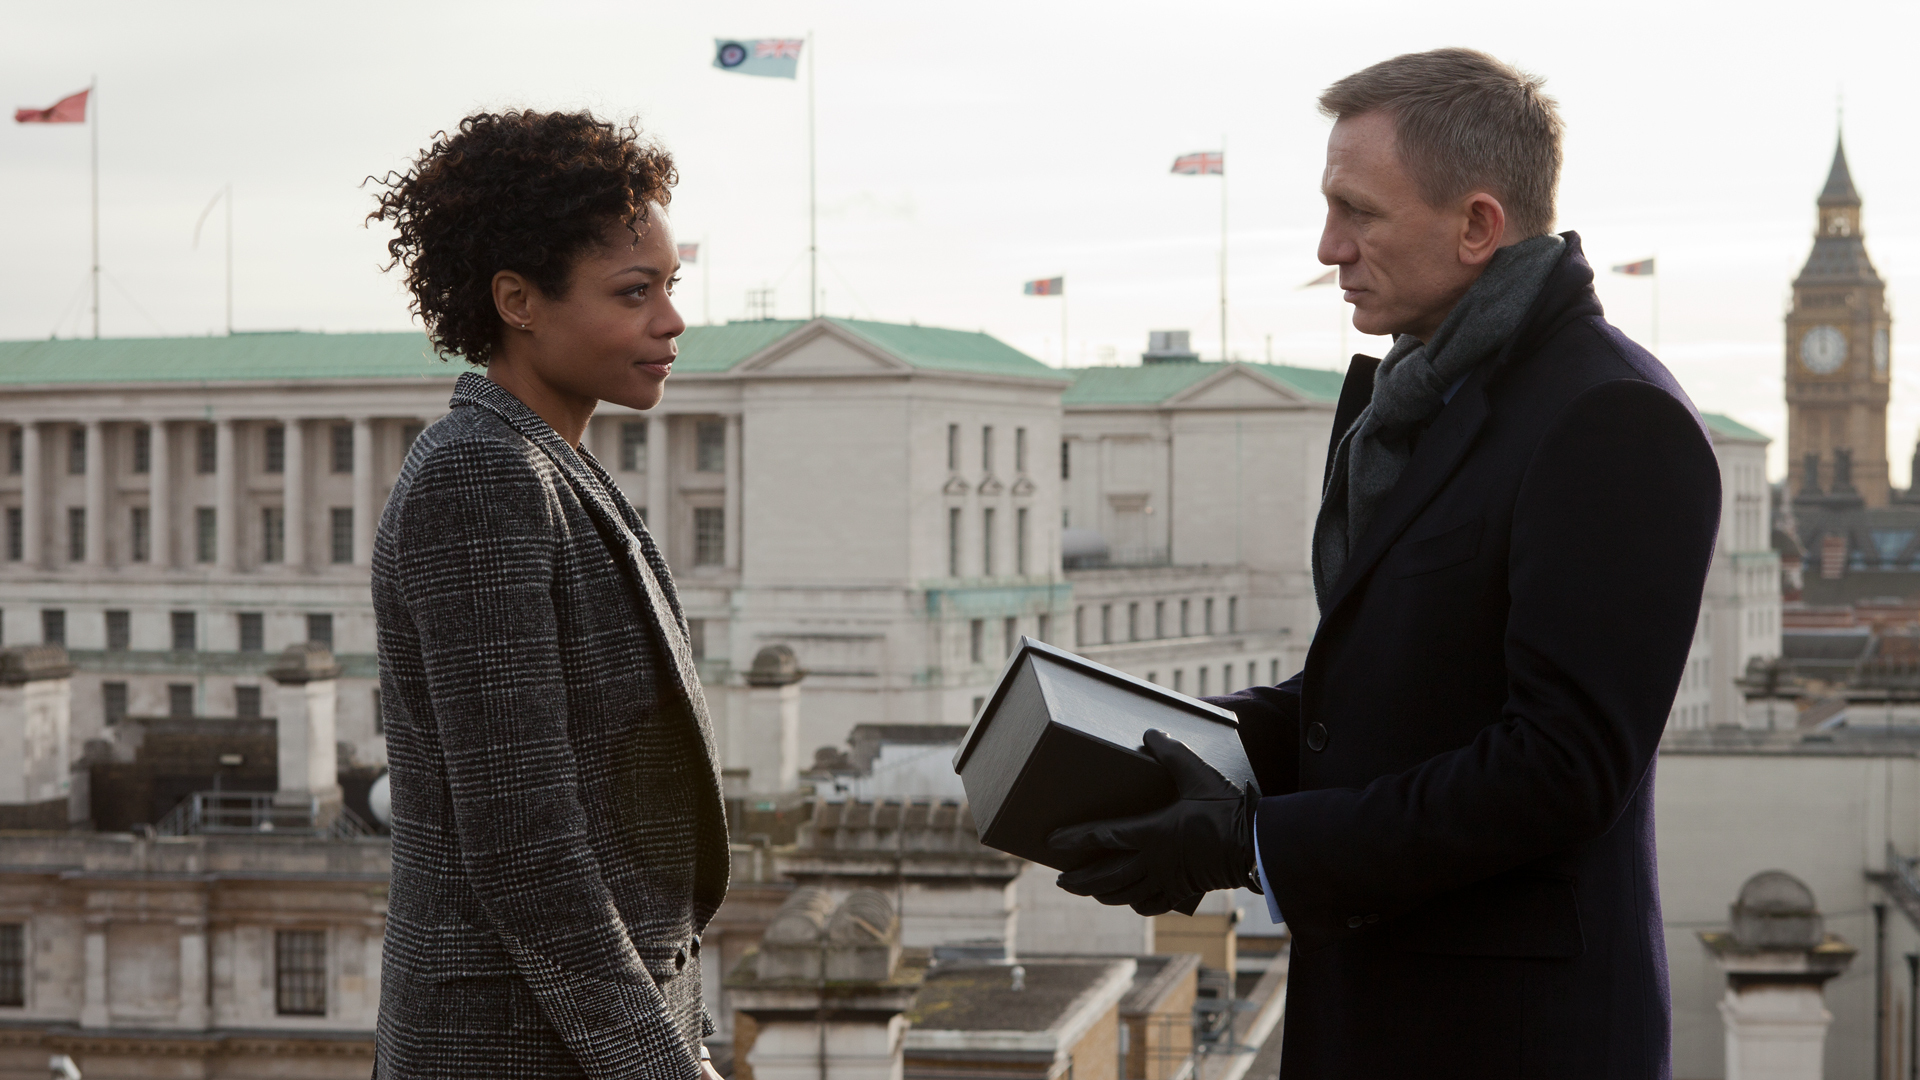 Eve (Naomie Harris) presents Bond (Daniel Craig) with a ceramic gift from M in "Skyfall."